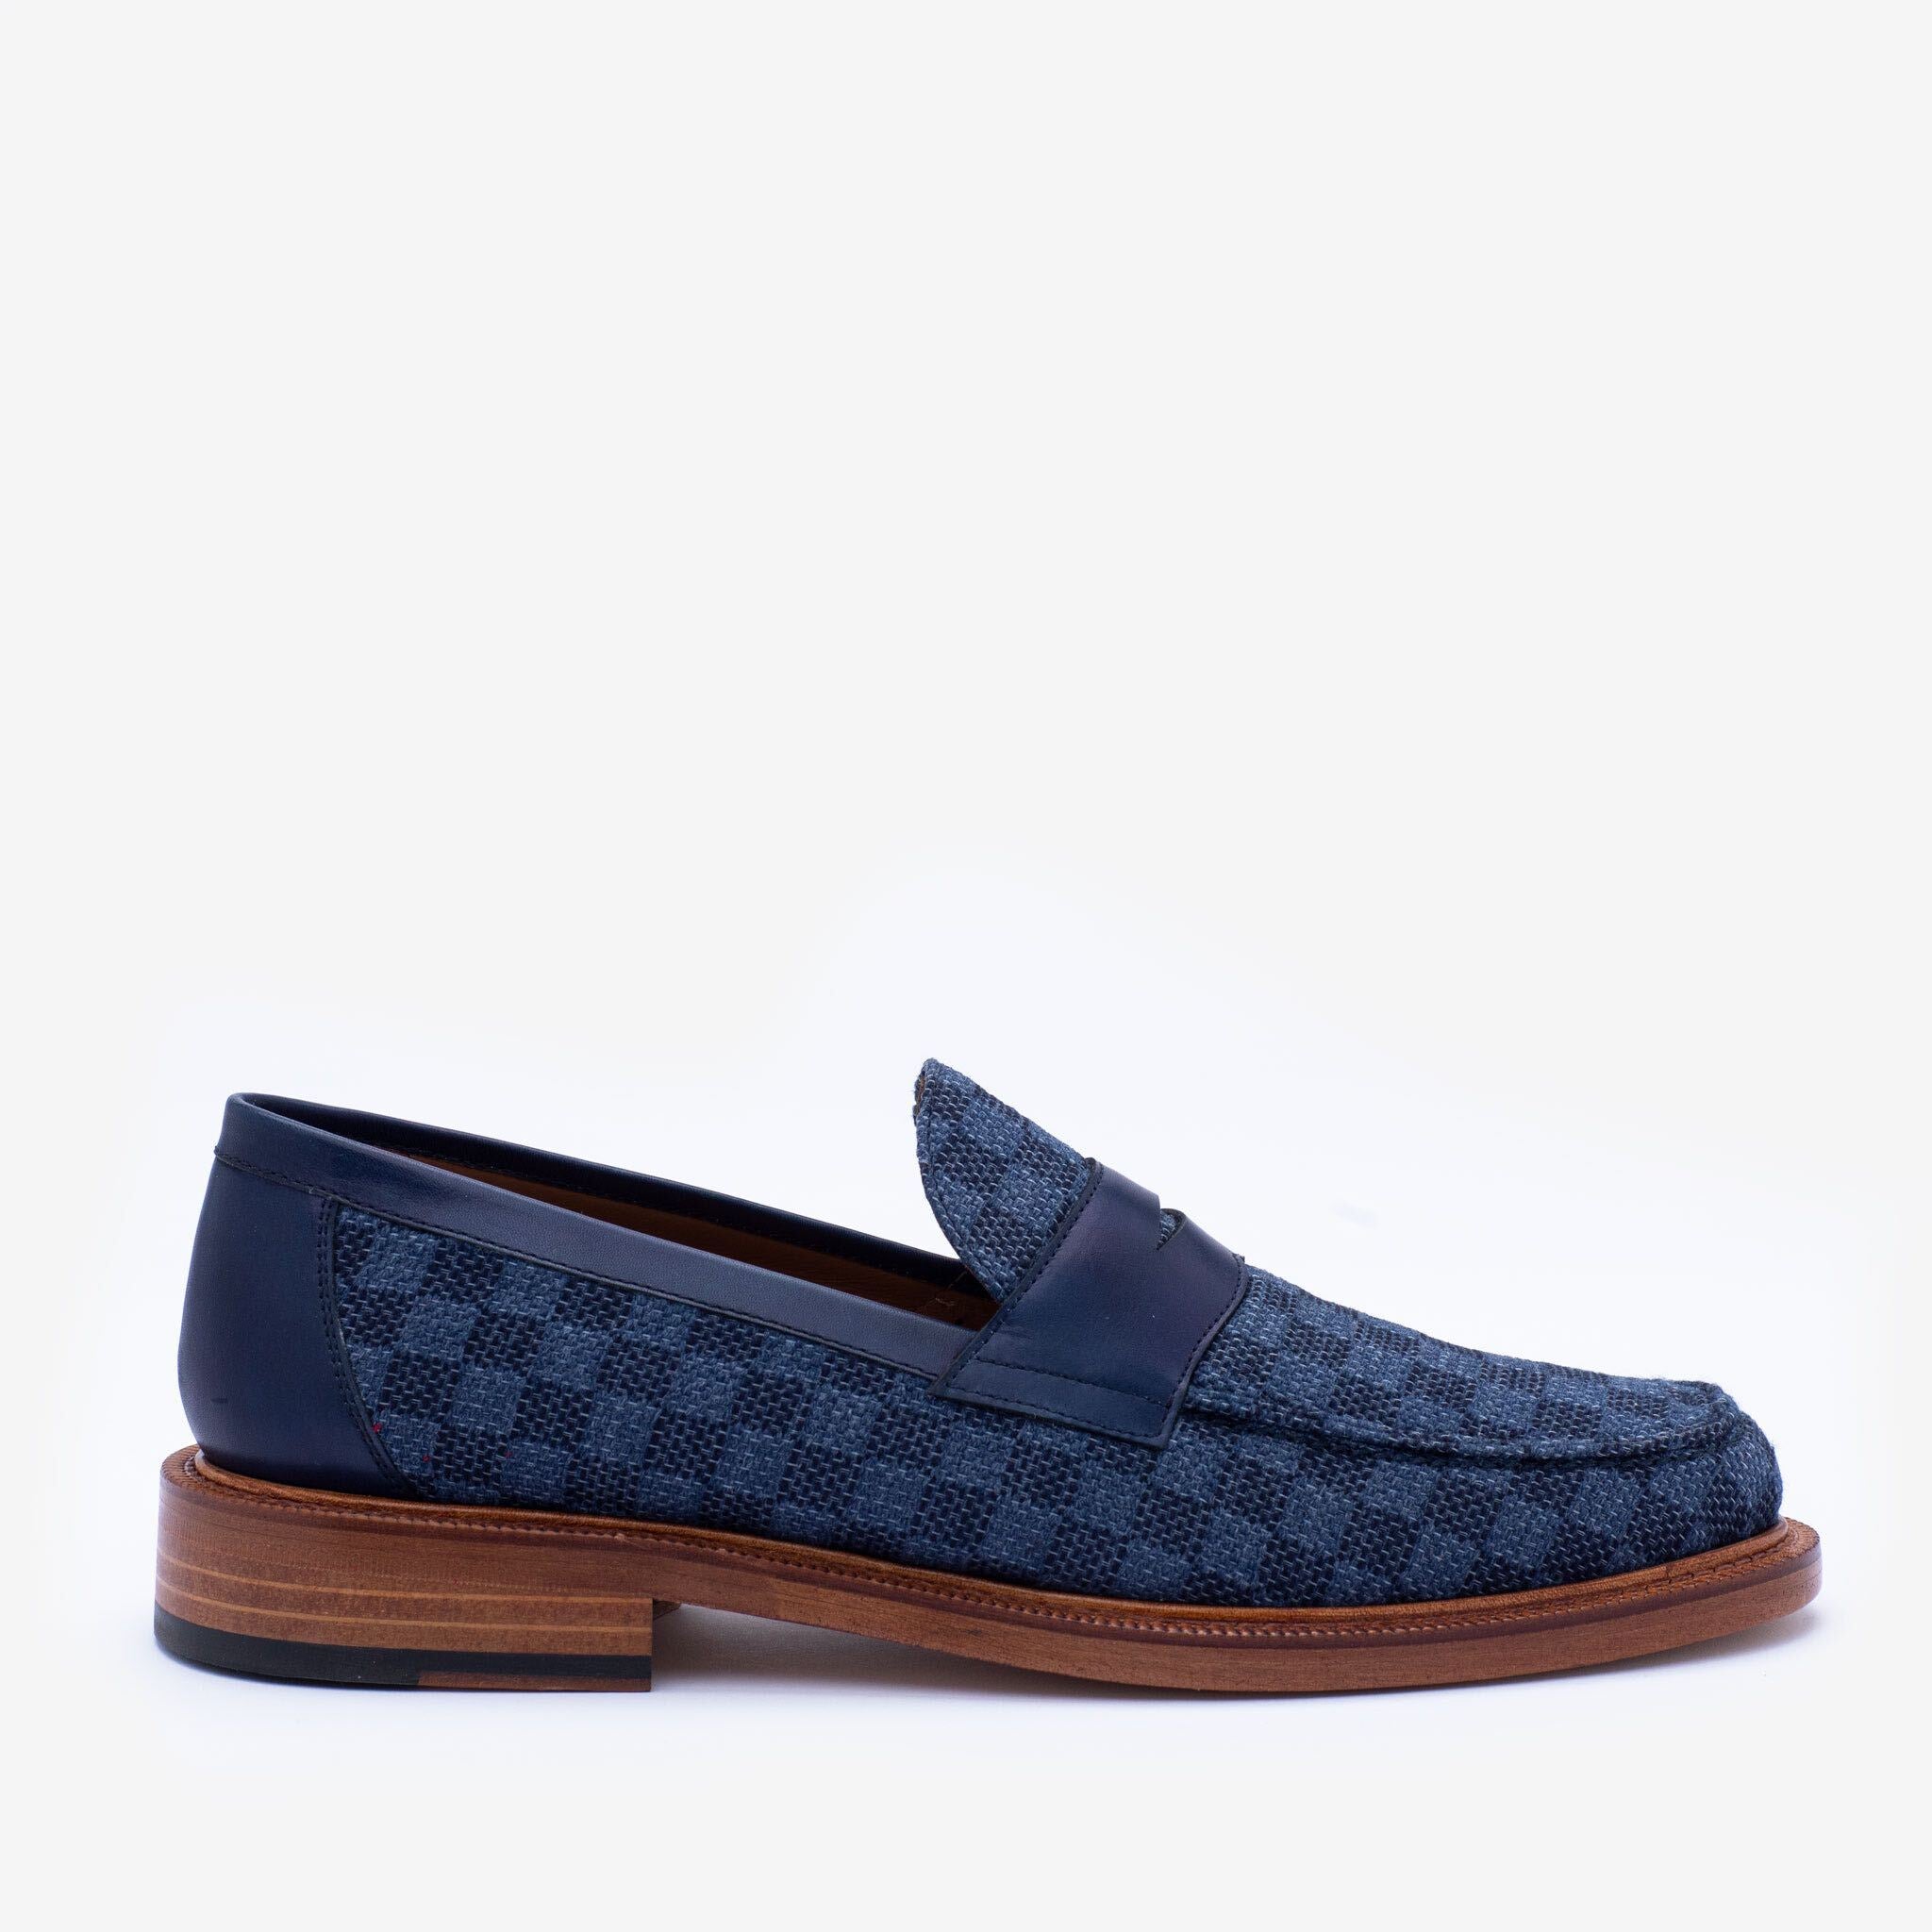 The Fitz Loafer in Blue Check (Last Chance, Final Sale)